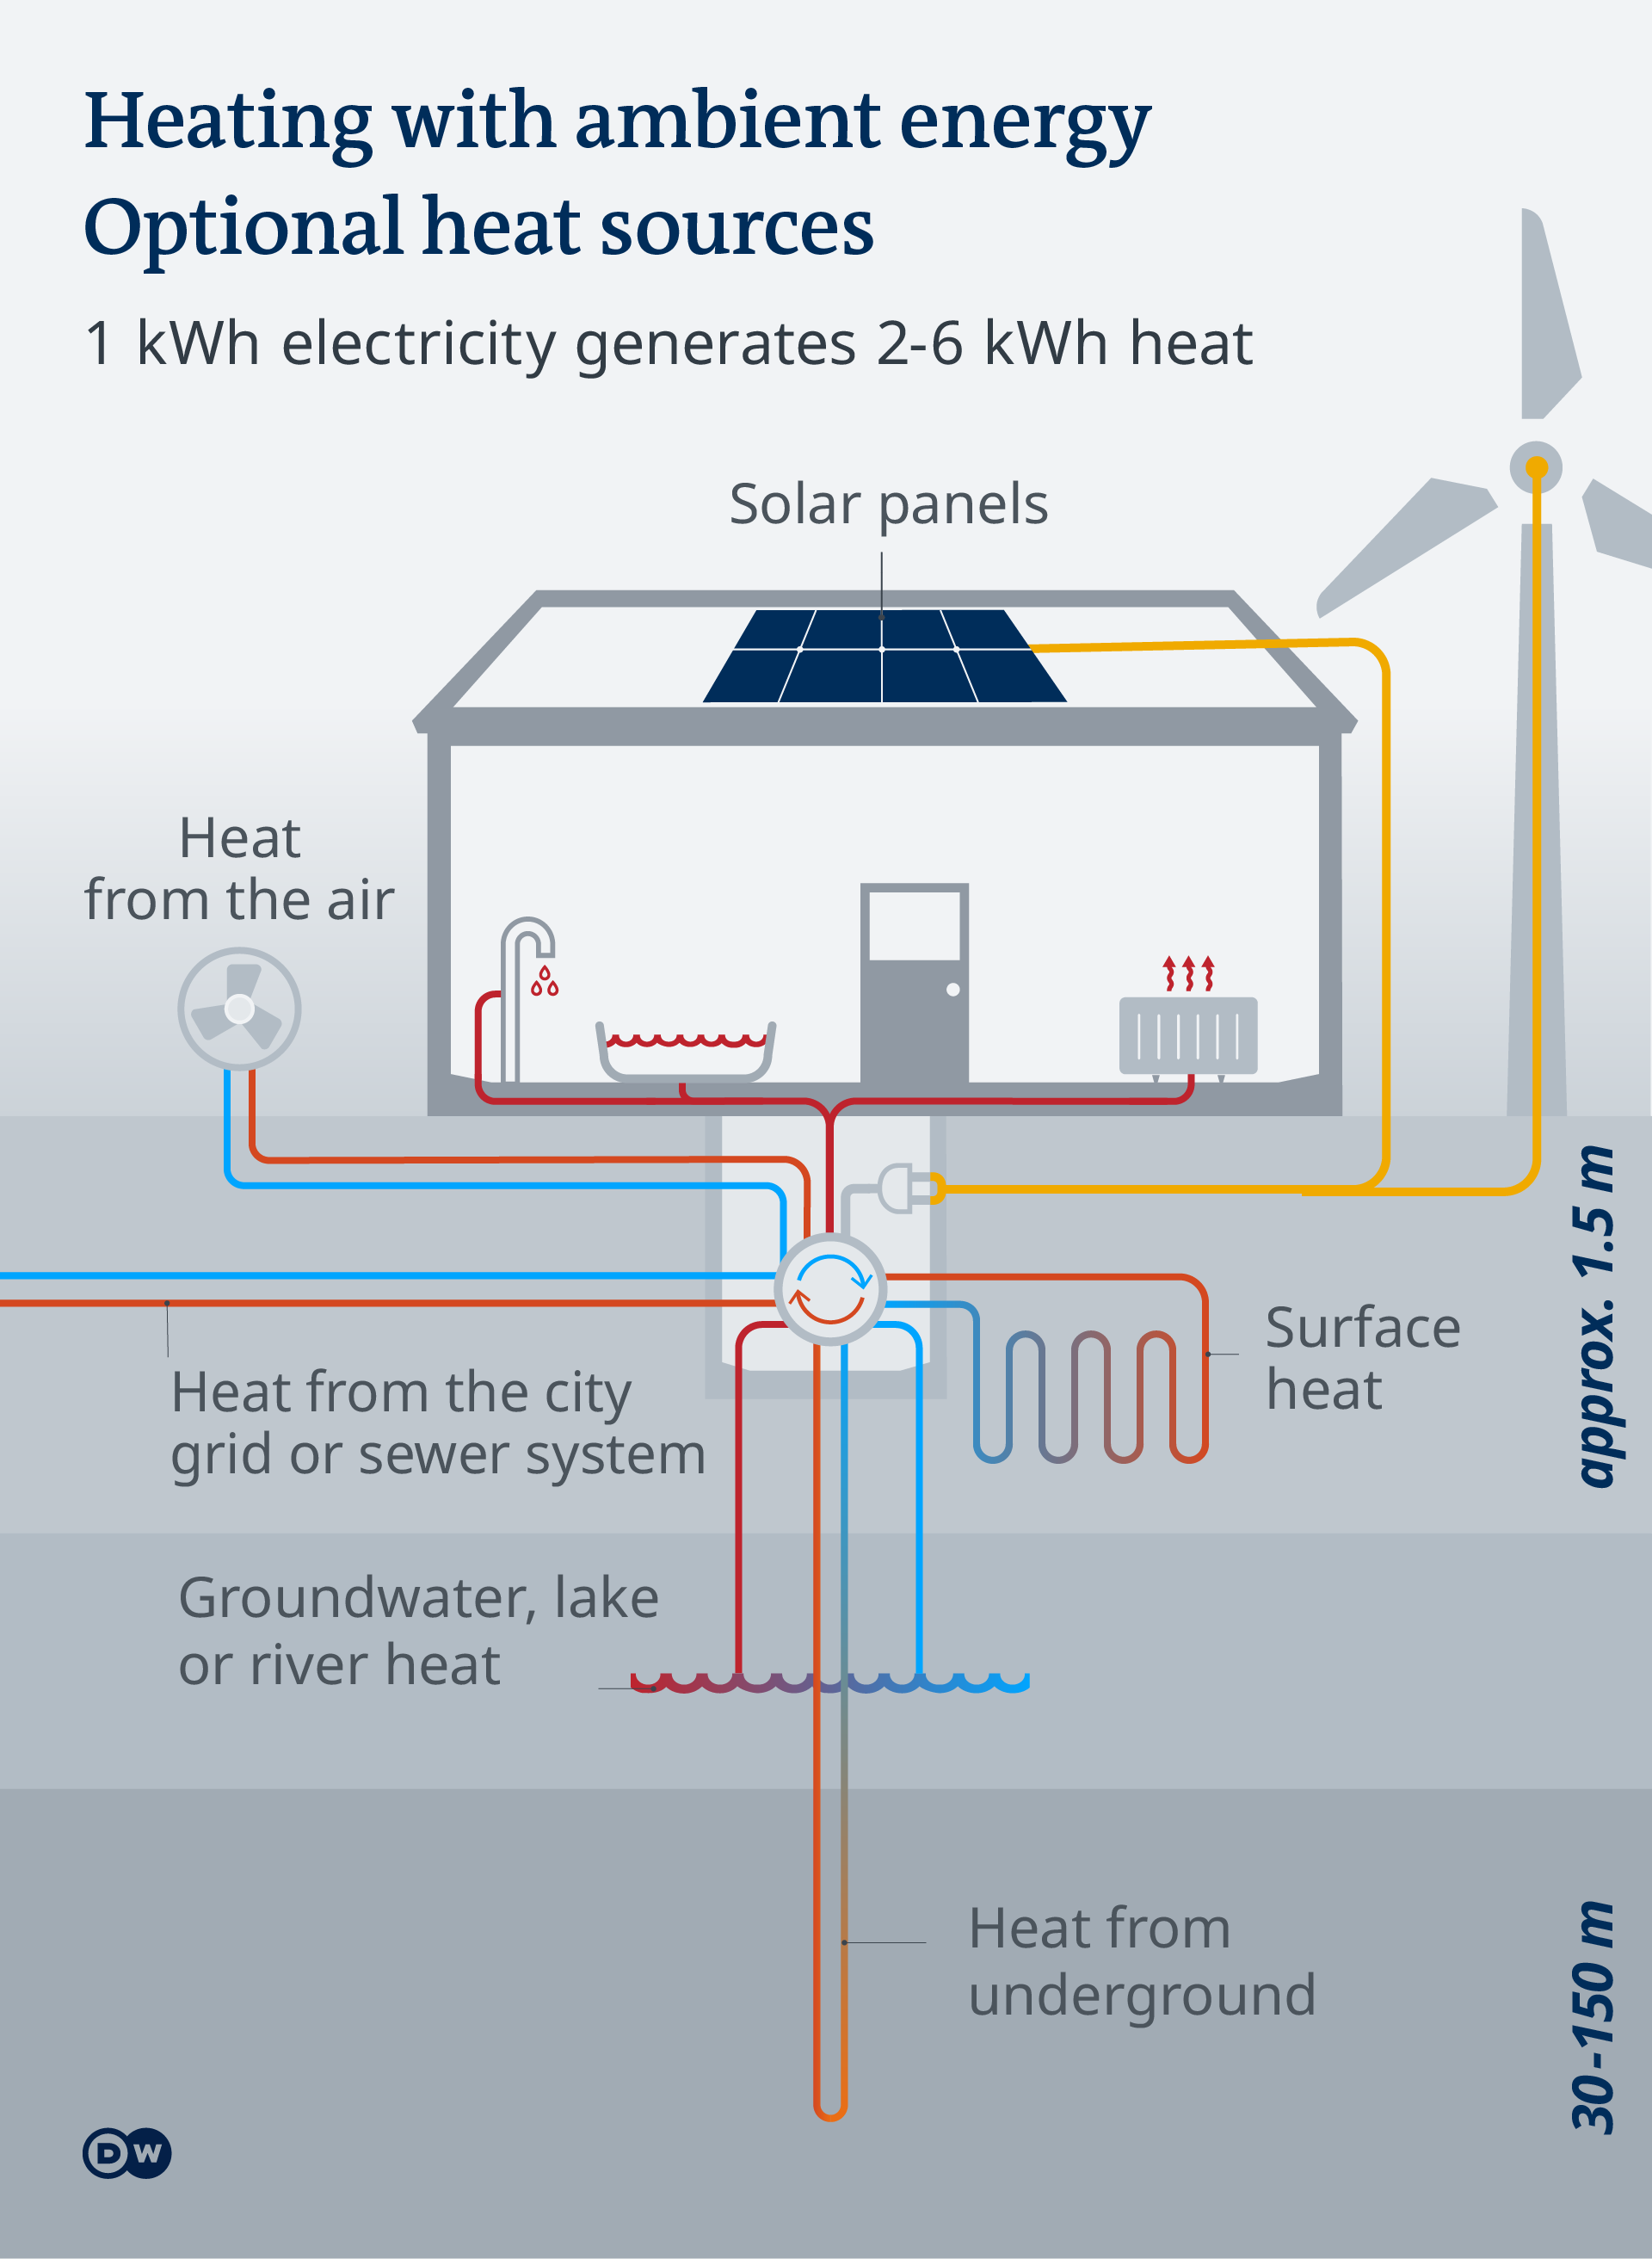 At home with a heat pump: 'It makes hot water when it's freezing